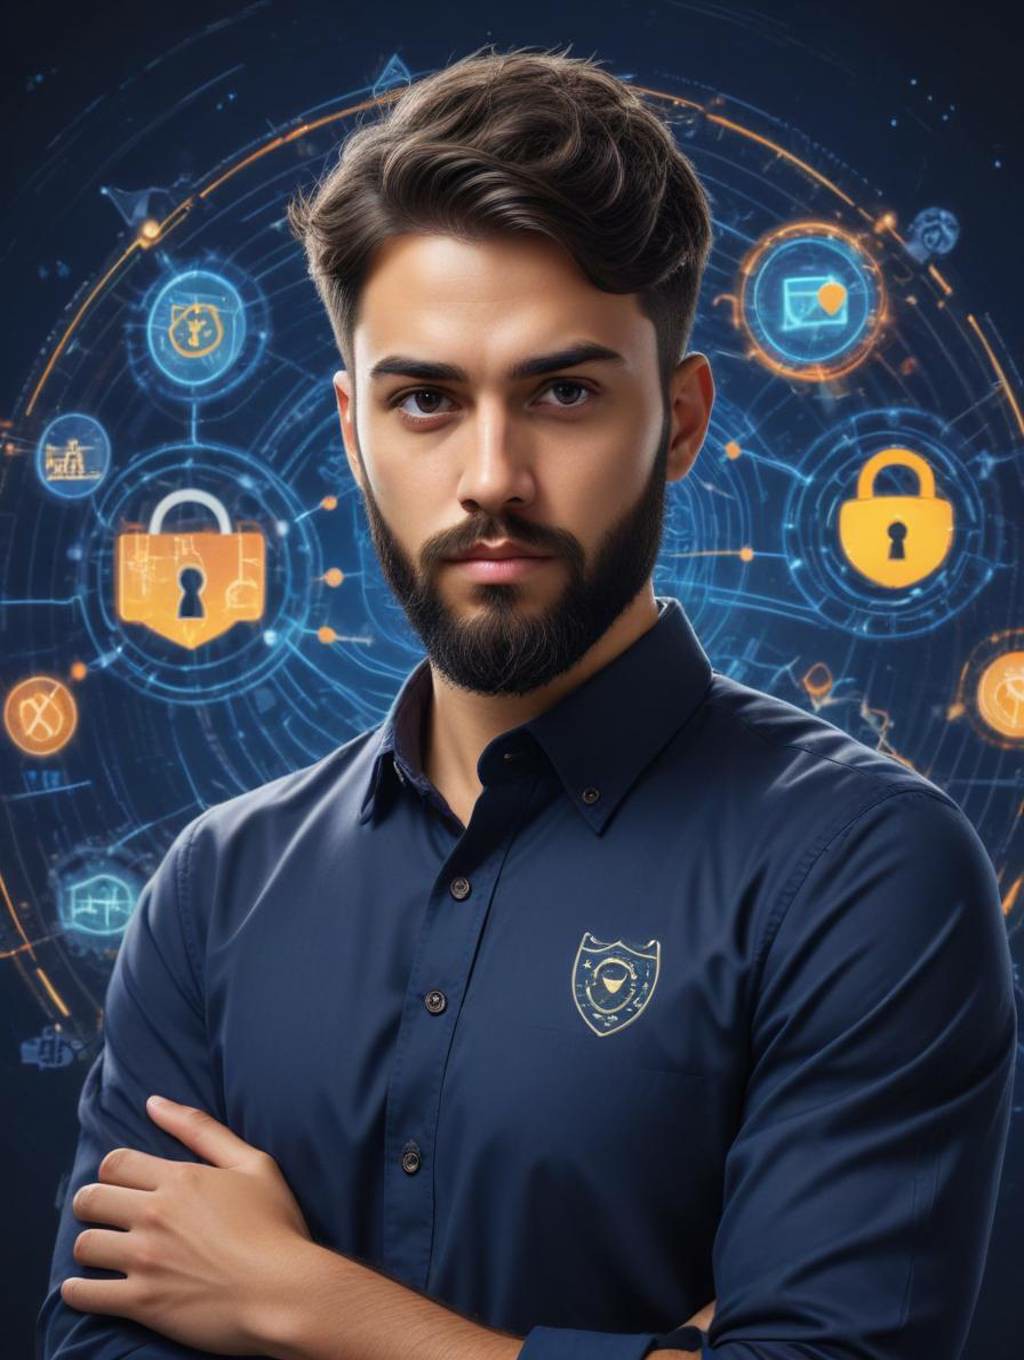 Cybersecurity Men: Gallery Frames & Profile Pictures-Theme:4